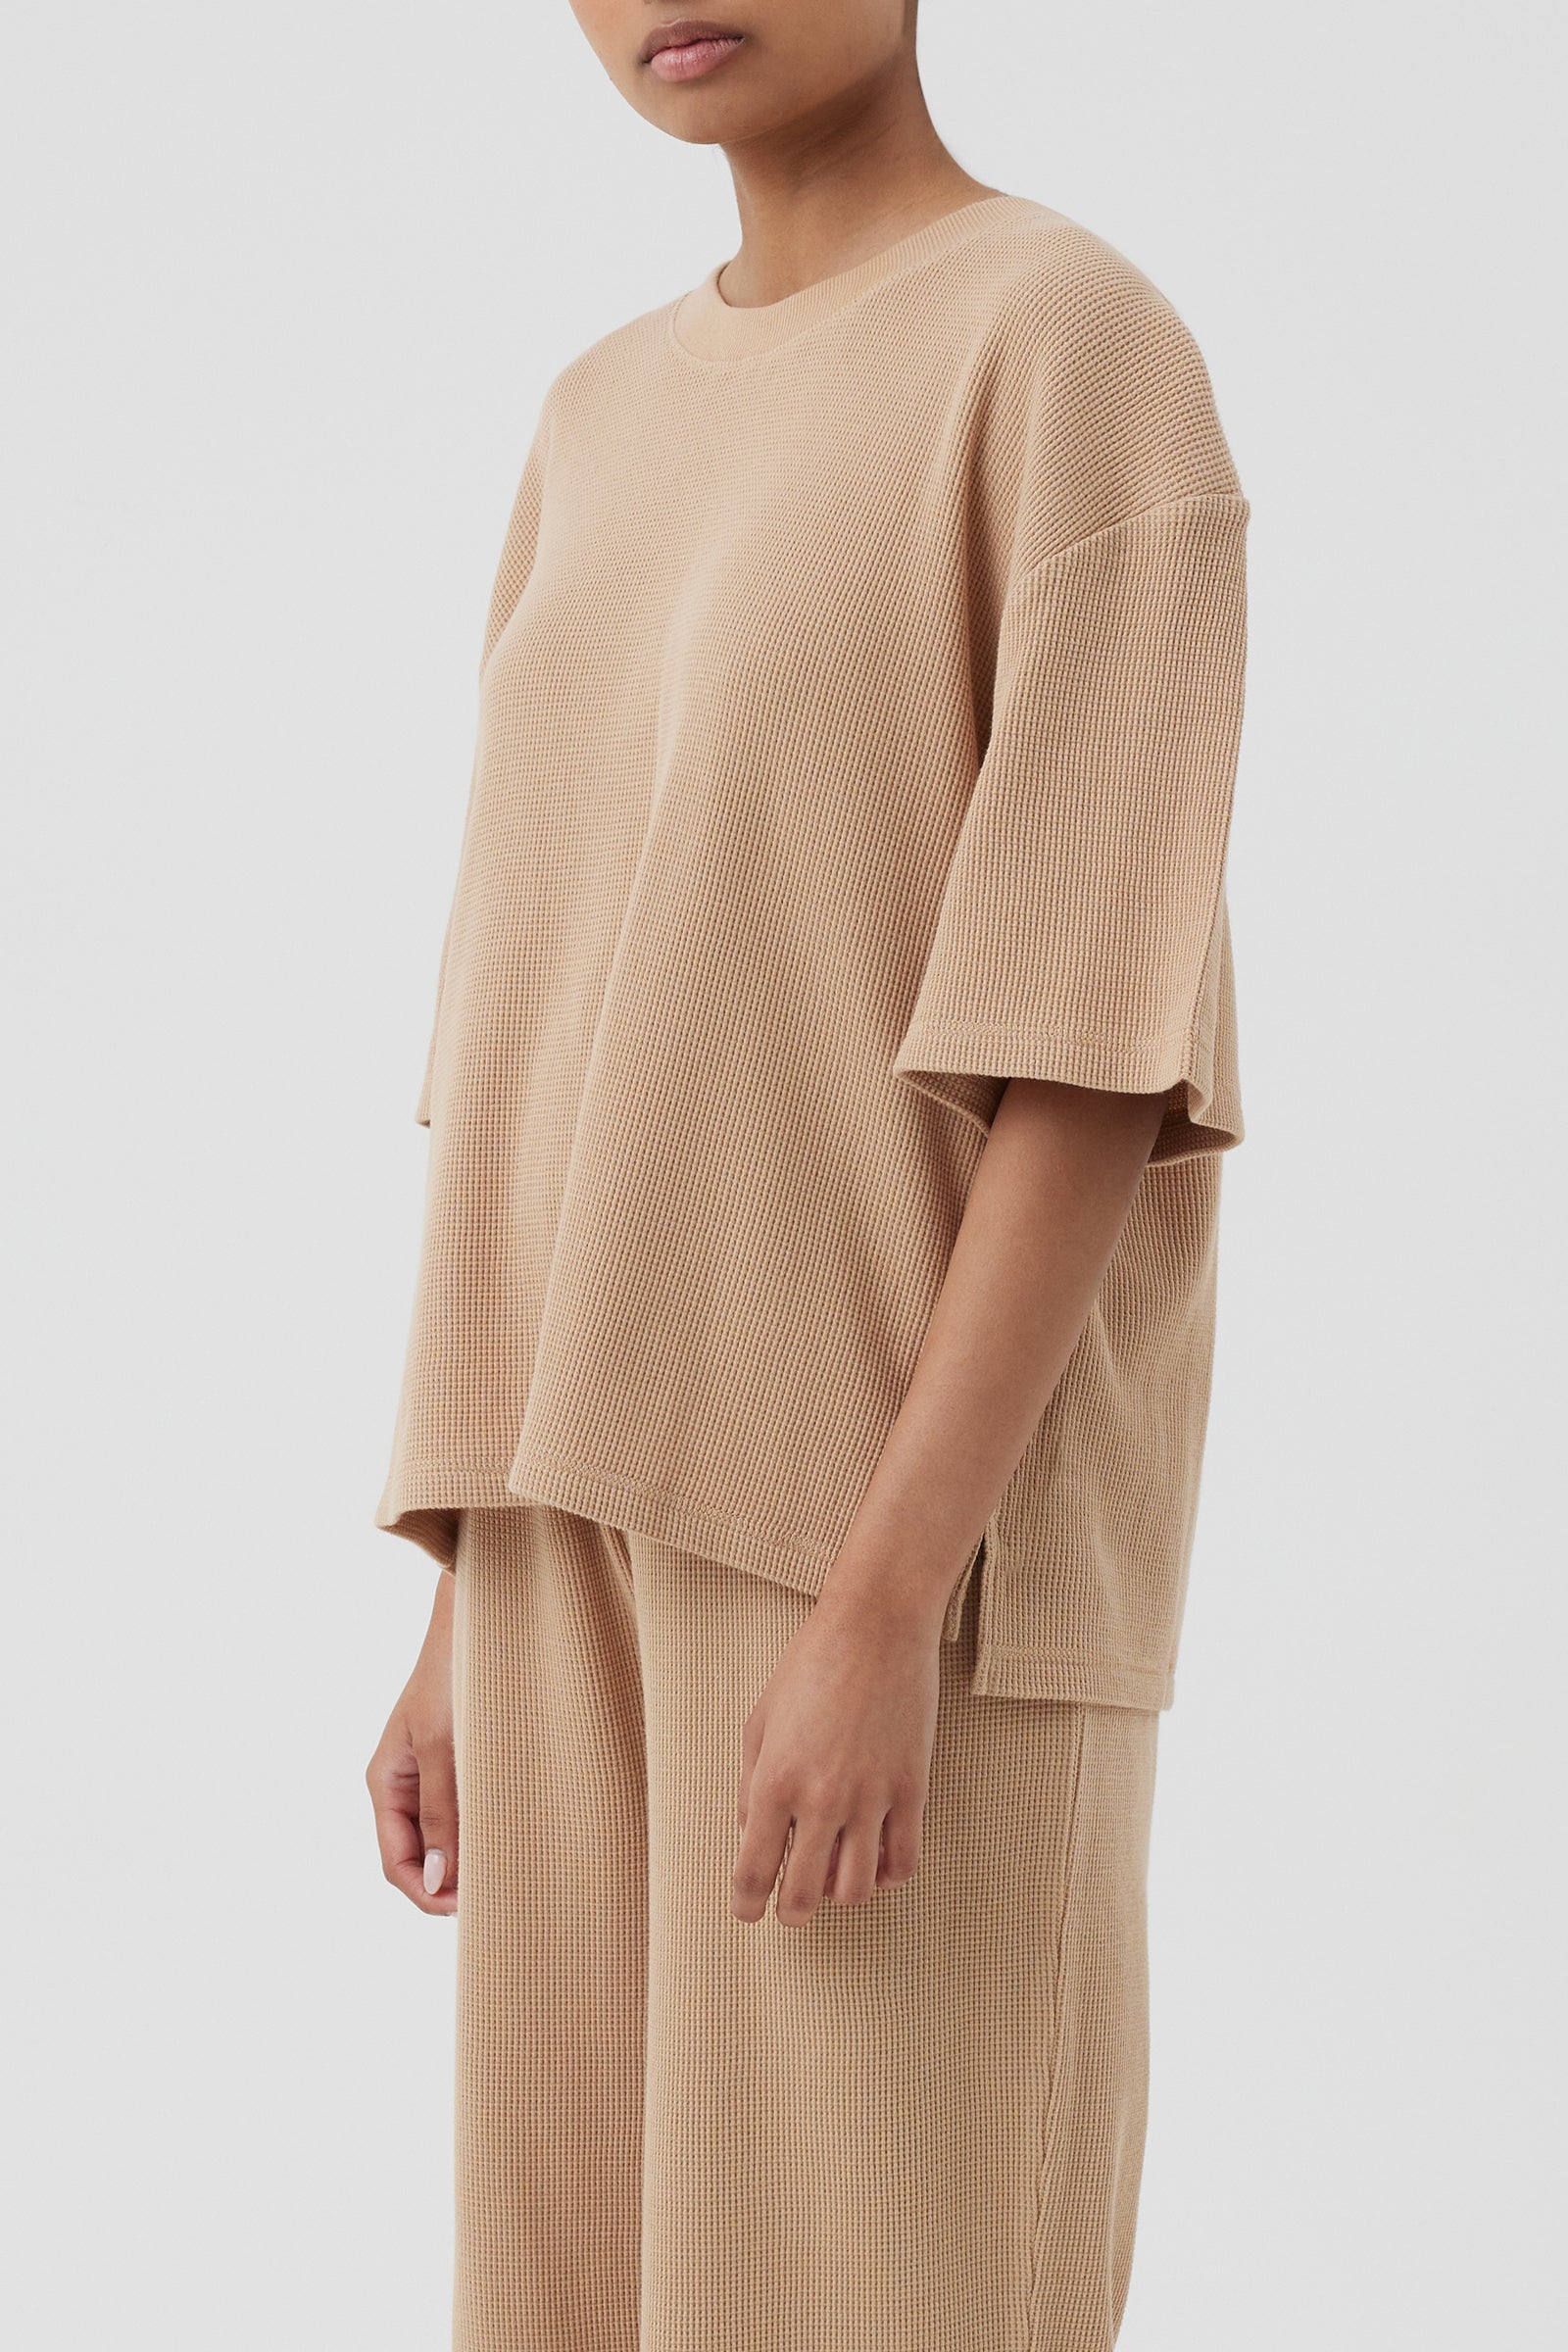 Nude Lucy Kin Waffle Tee In a Light Brown Biscuit Colour